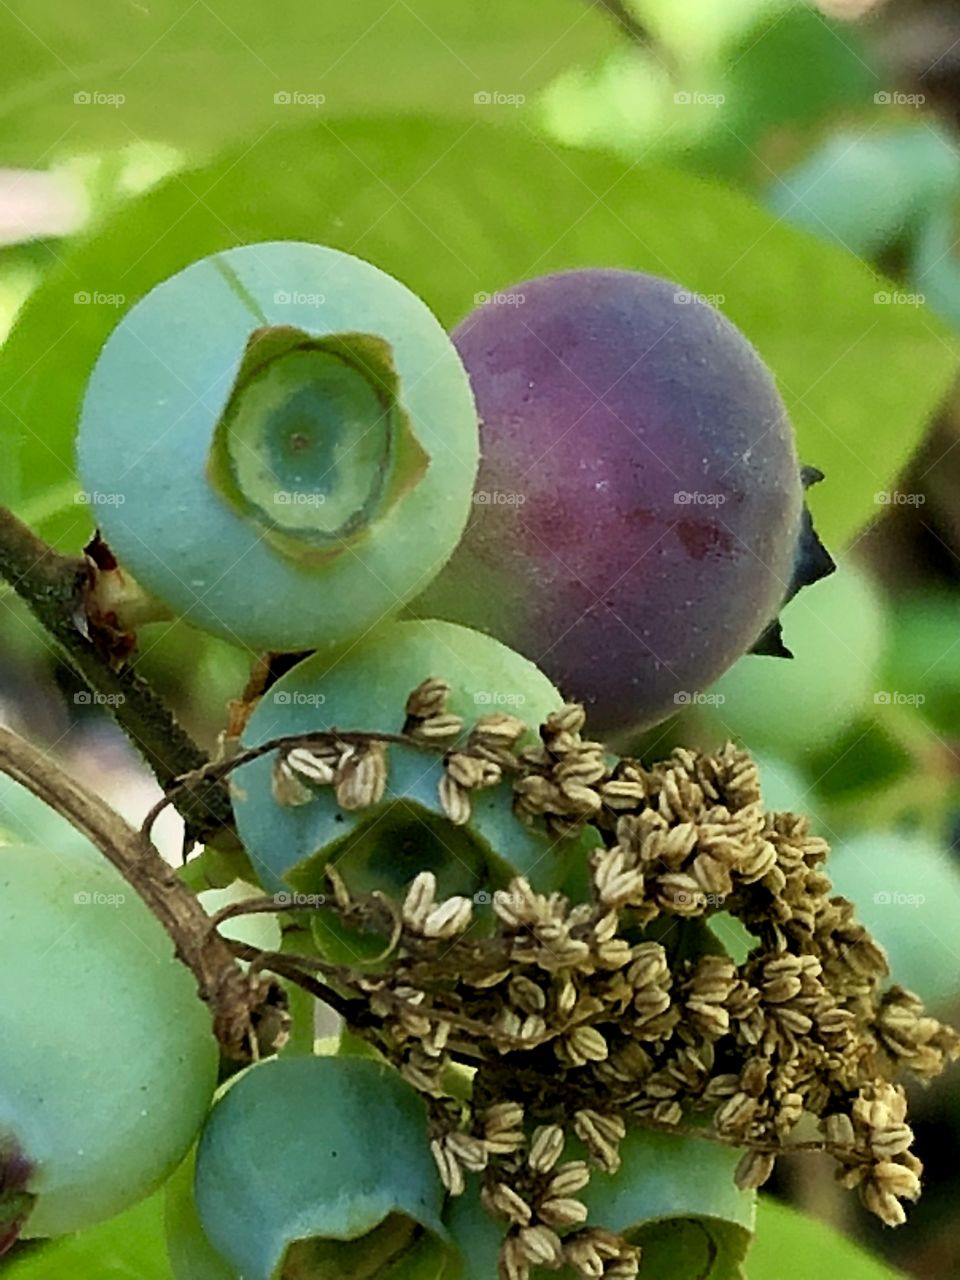 Ripening blueberries.... promises of delicious snacking to come! Healthy, juicy, and bursting with antioxidants- 